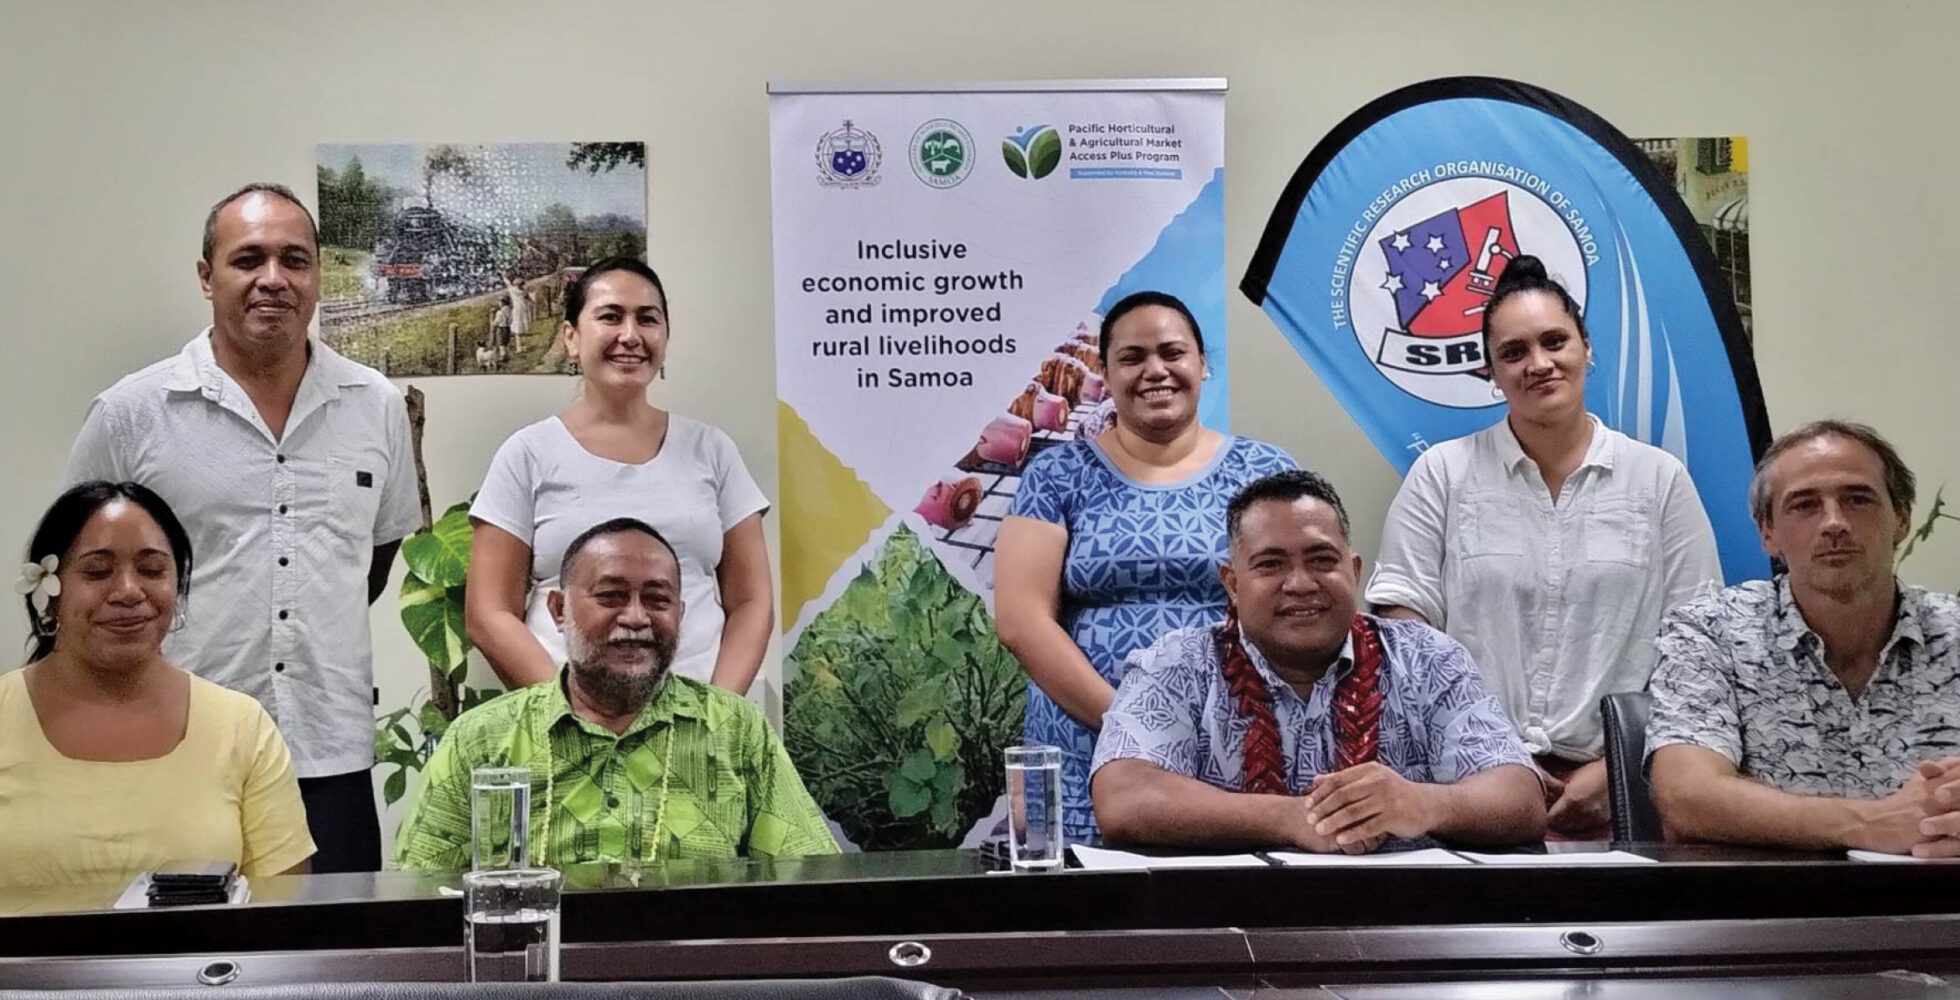 SROS SIGNS MOU TO BOOST SCIENTIFIC RESEARCH AND AGRICULTURAL EXPORTS IN SAMOA